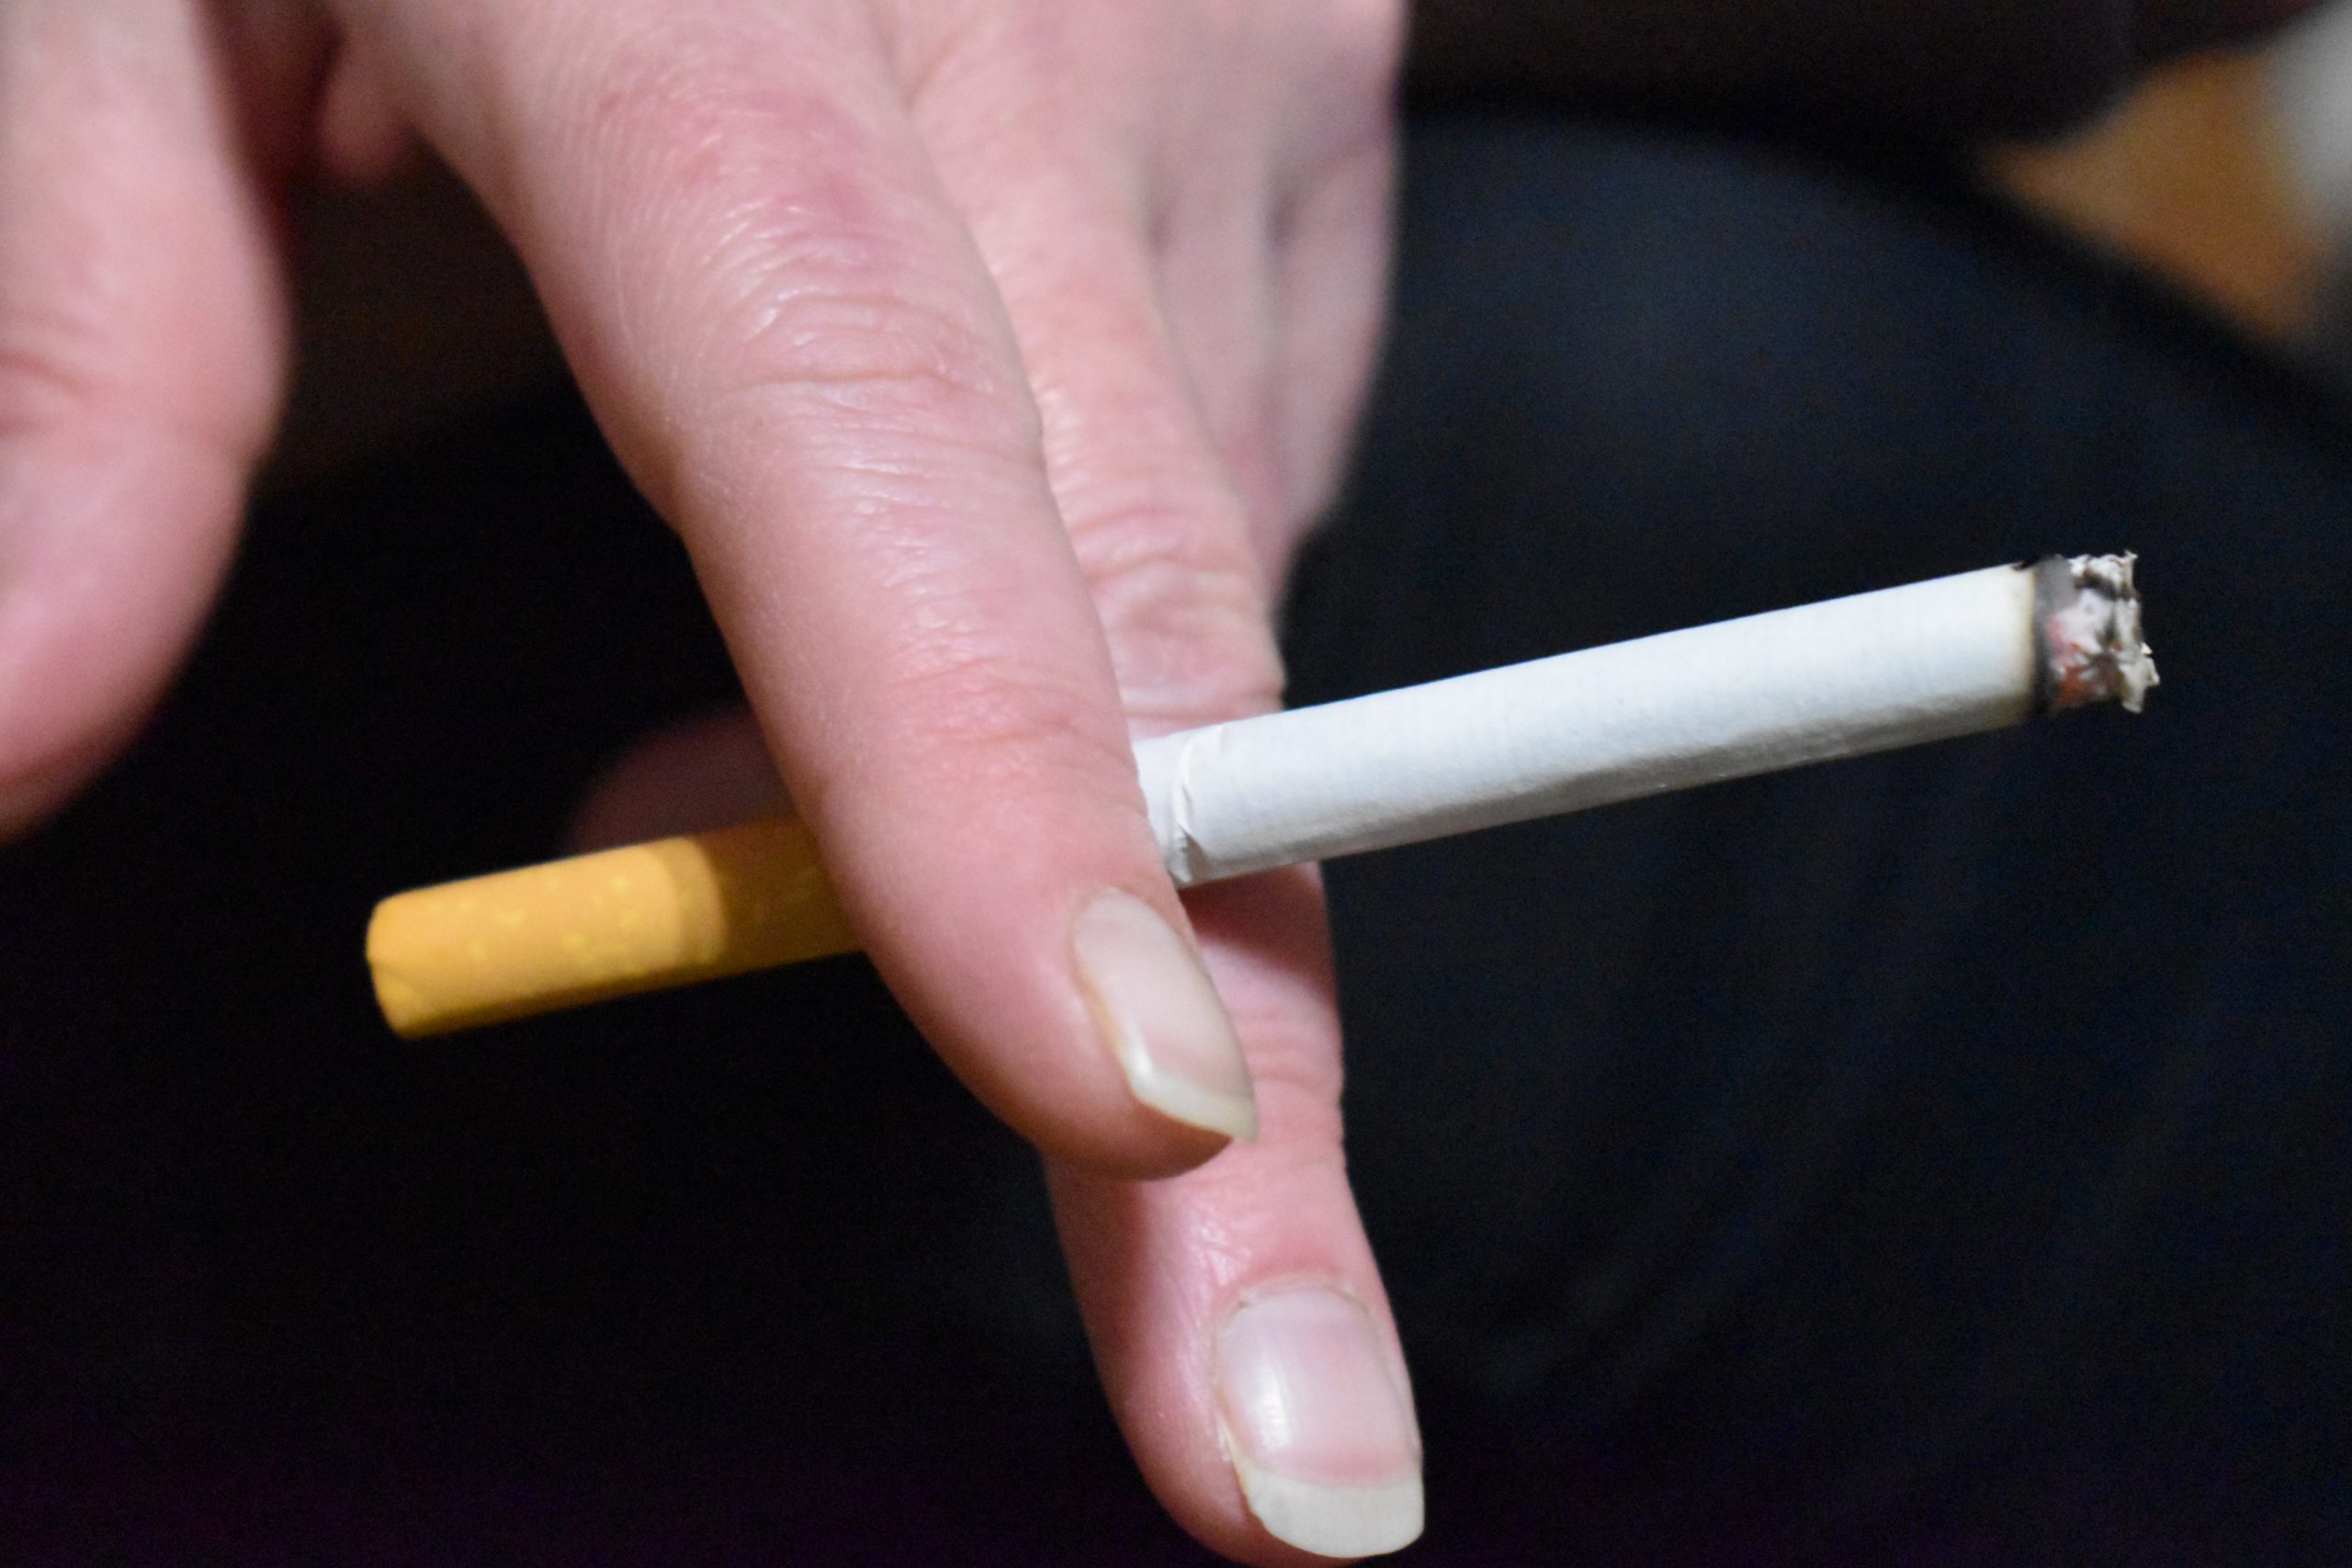 17.6% of people aged 15 years and over smoke in Spain's Valencian Community